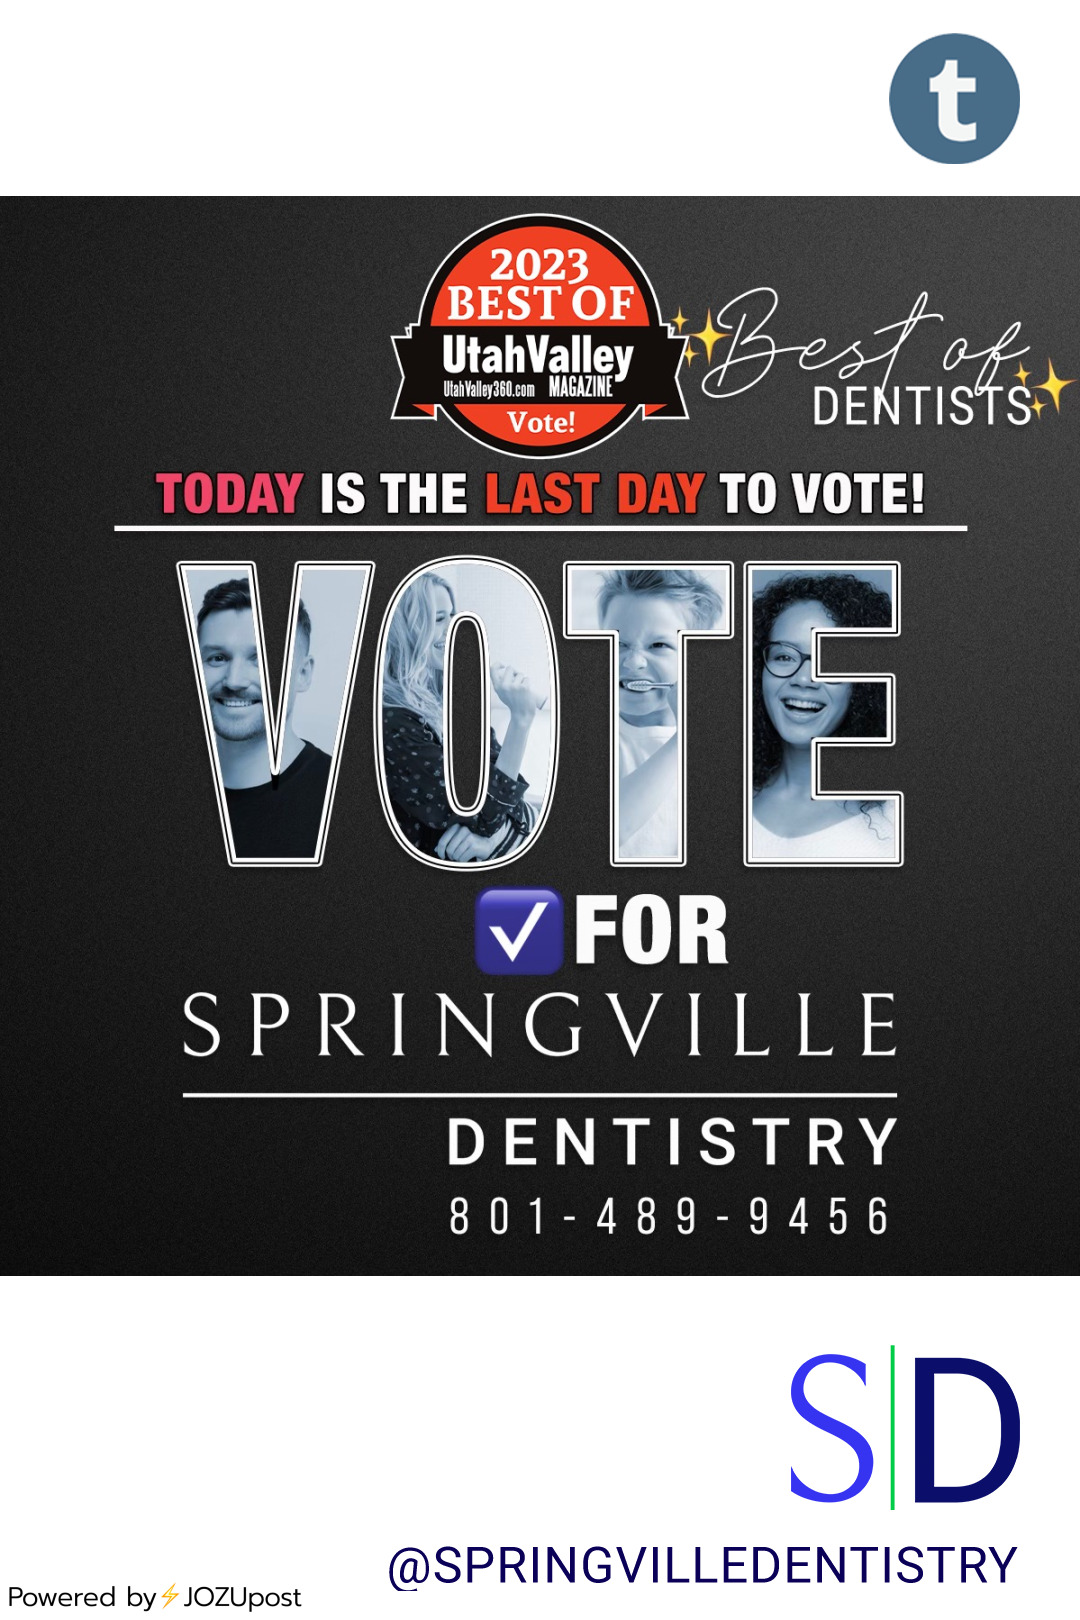 Why should you vote for Springville Dentistry?
Expertise: Springville Dentistry specializes in a wide array of dental services, including wisdom tooth removal, implants, crowns, veneers, bridges, composite “white” fillings, bonding, and general...